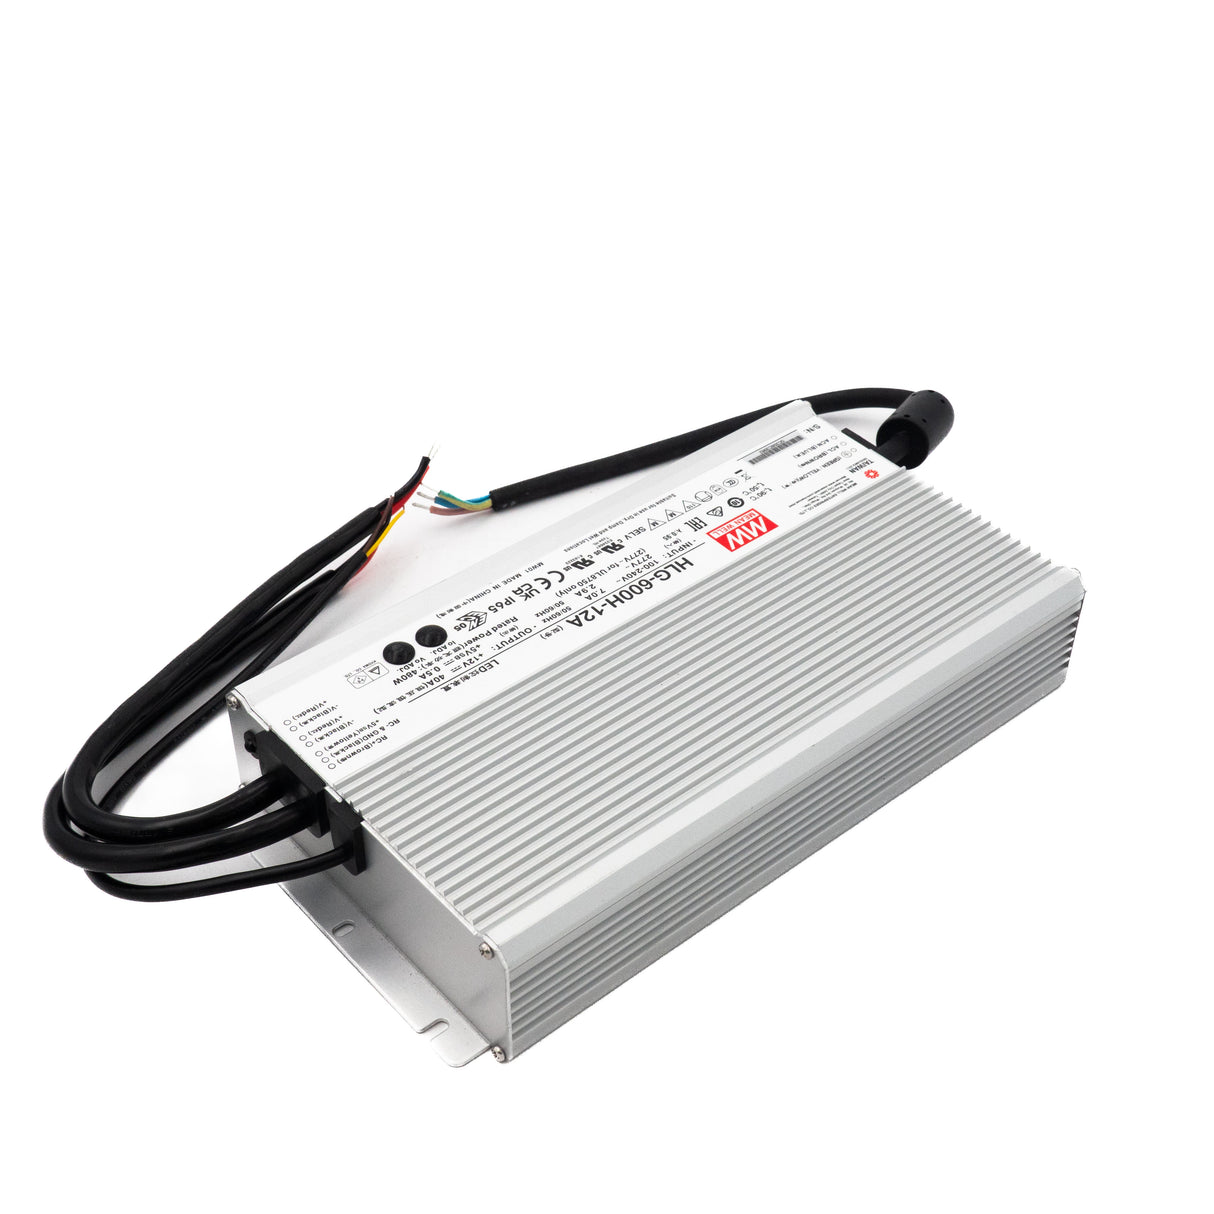 Mean Well HLG-600H-12A Power Supply 480W 12V - Adjustable - PHOTO 2